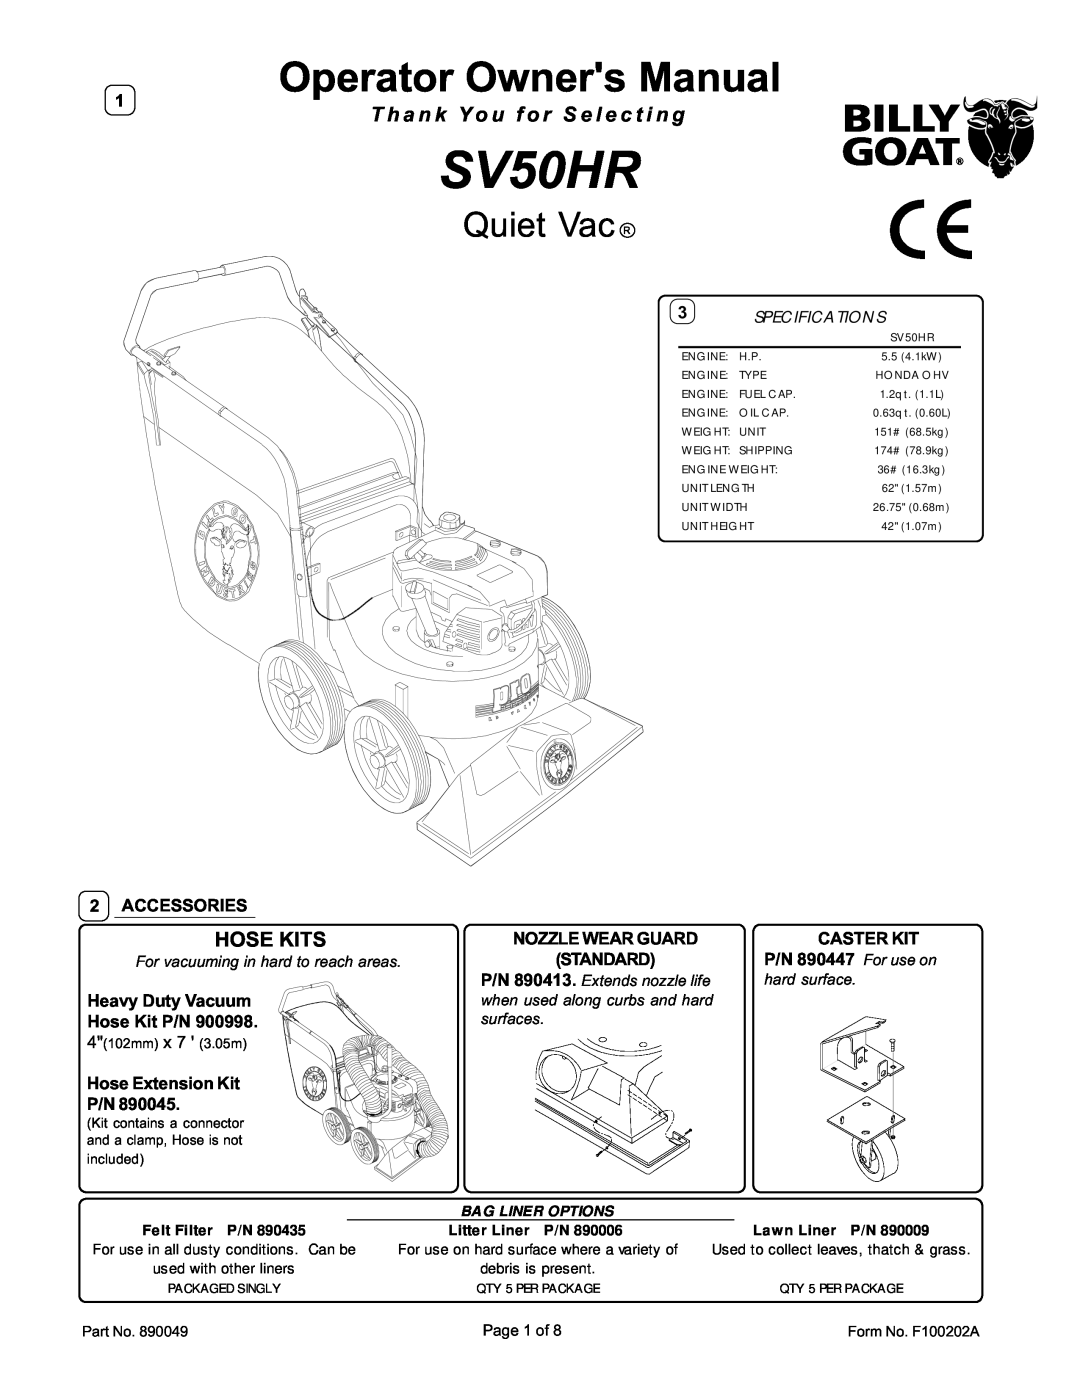 Billy Goat SV50HR owner manual Quiet Vac R, T h a n k Y o u f o r S e l e c t i n g, Hose Kits, Accessories, Caster Kit 